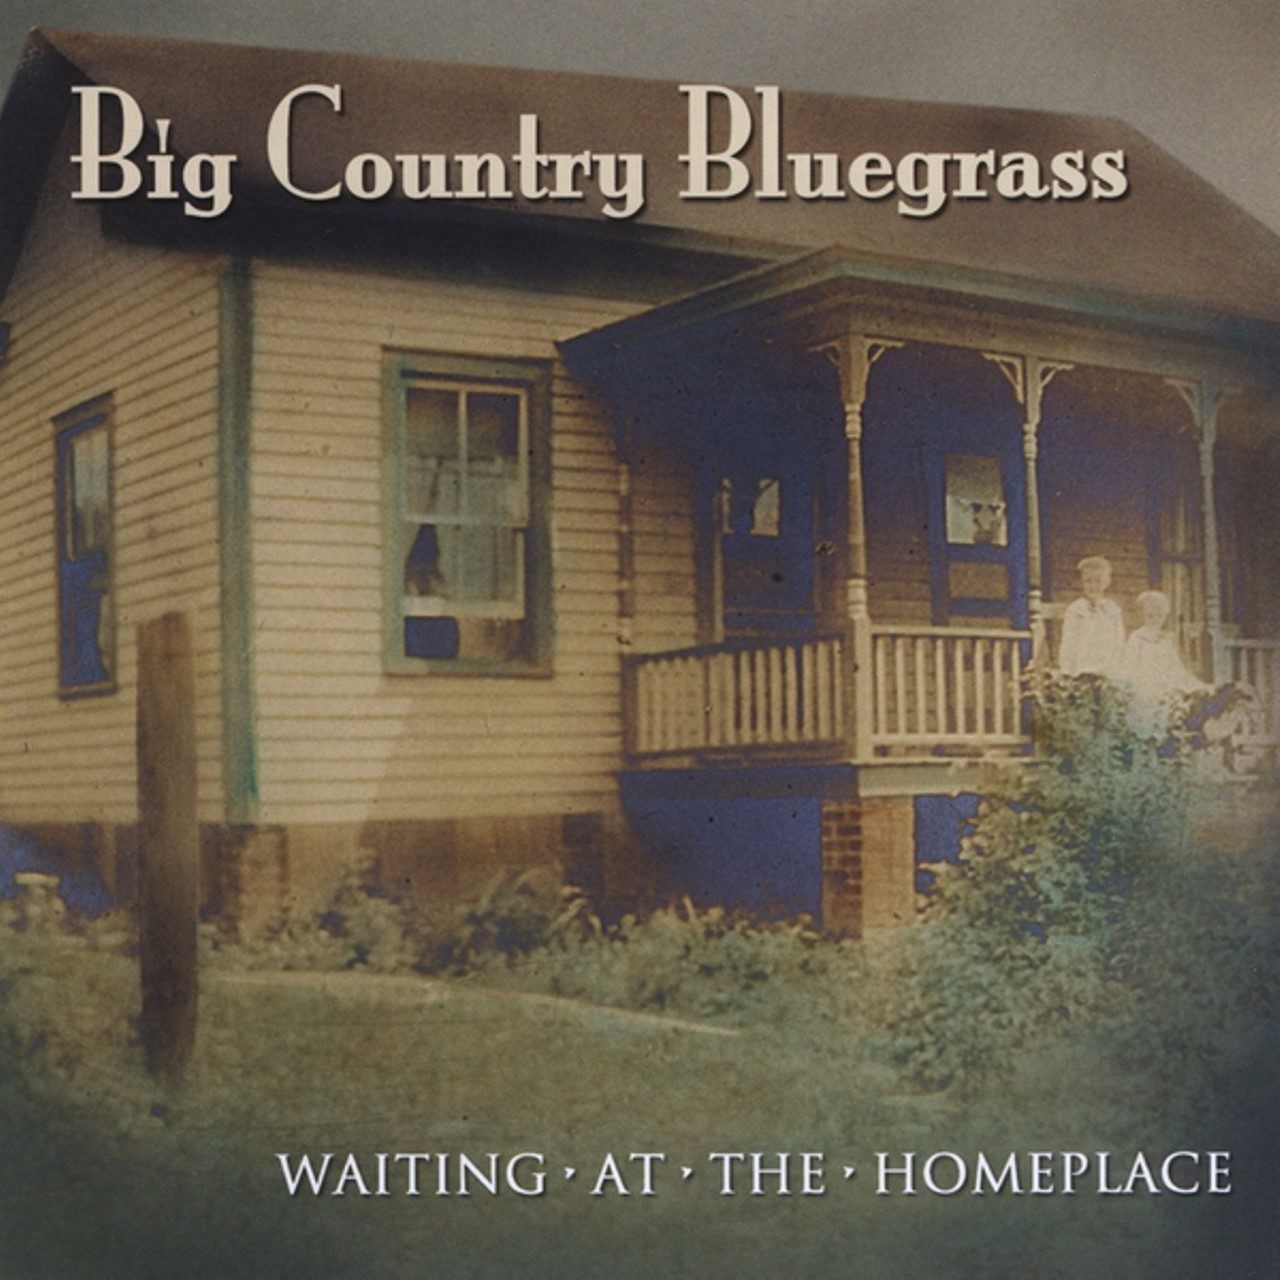 Big Country Bluegrass - Waiting At The Homeplace cover album